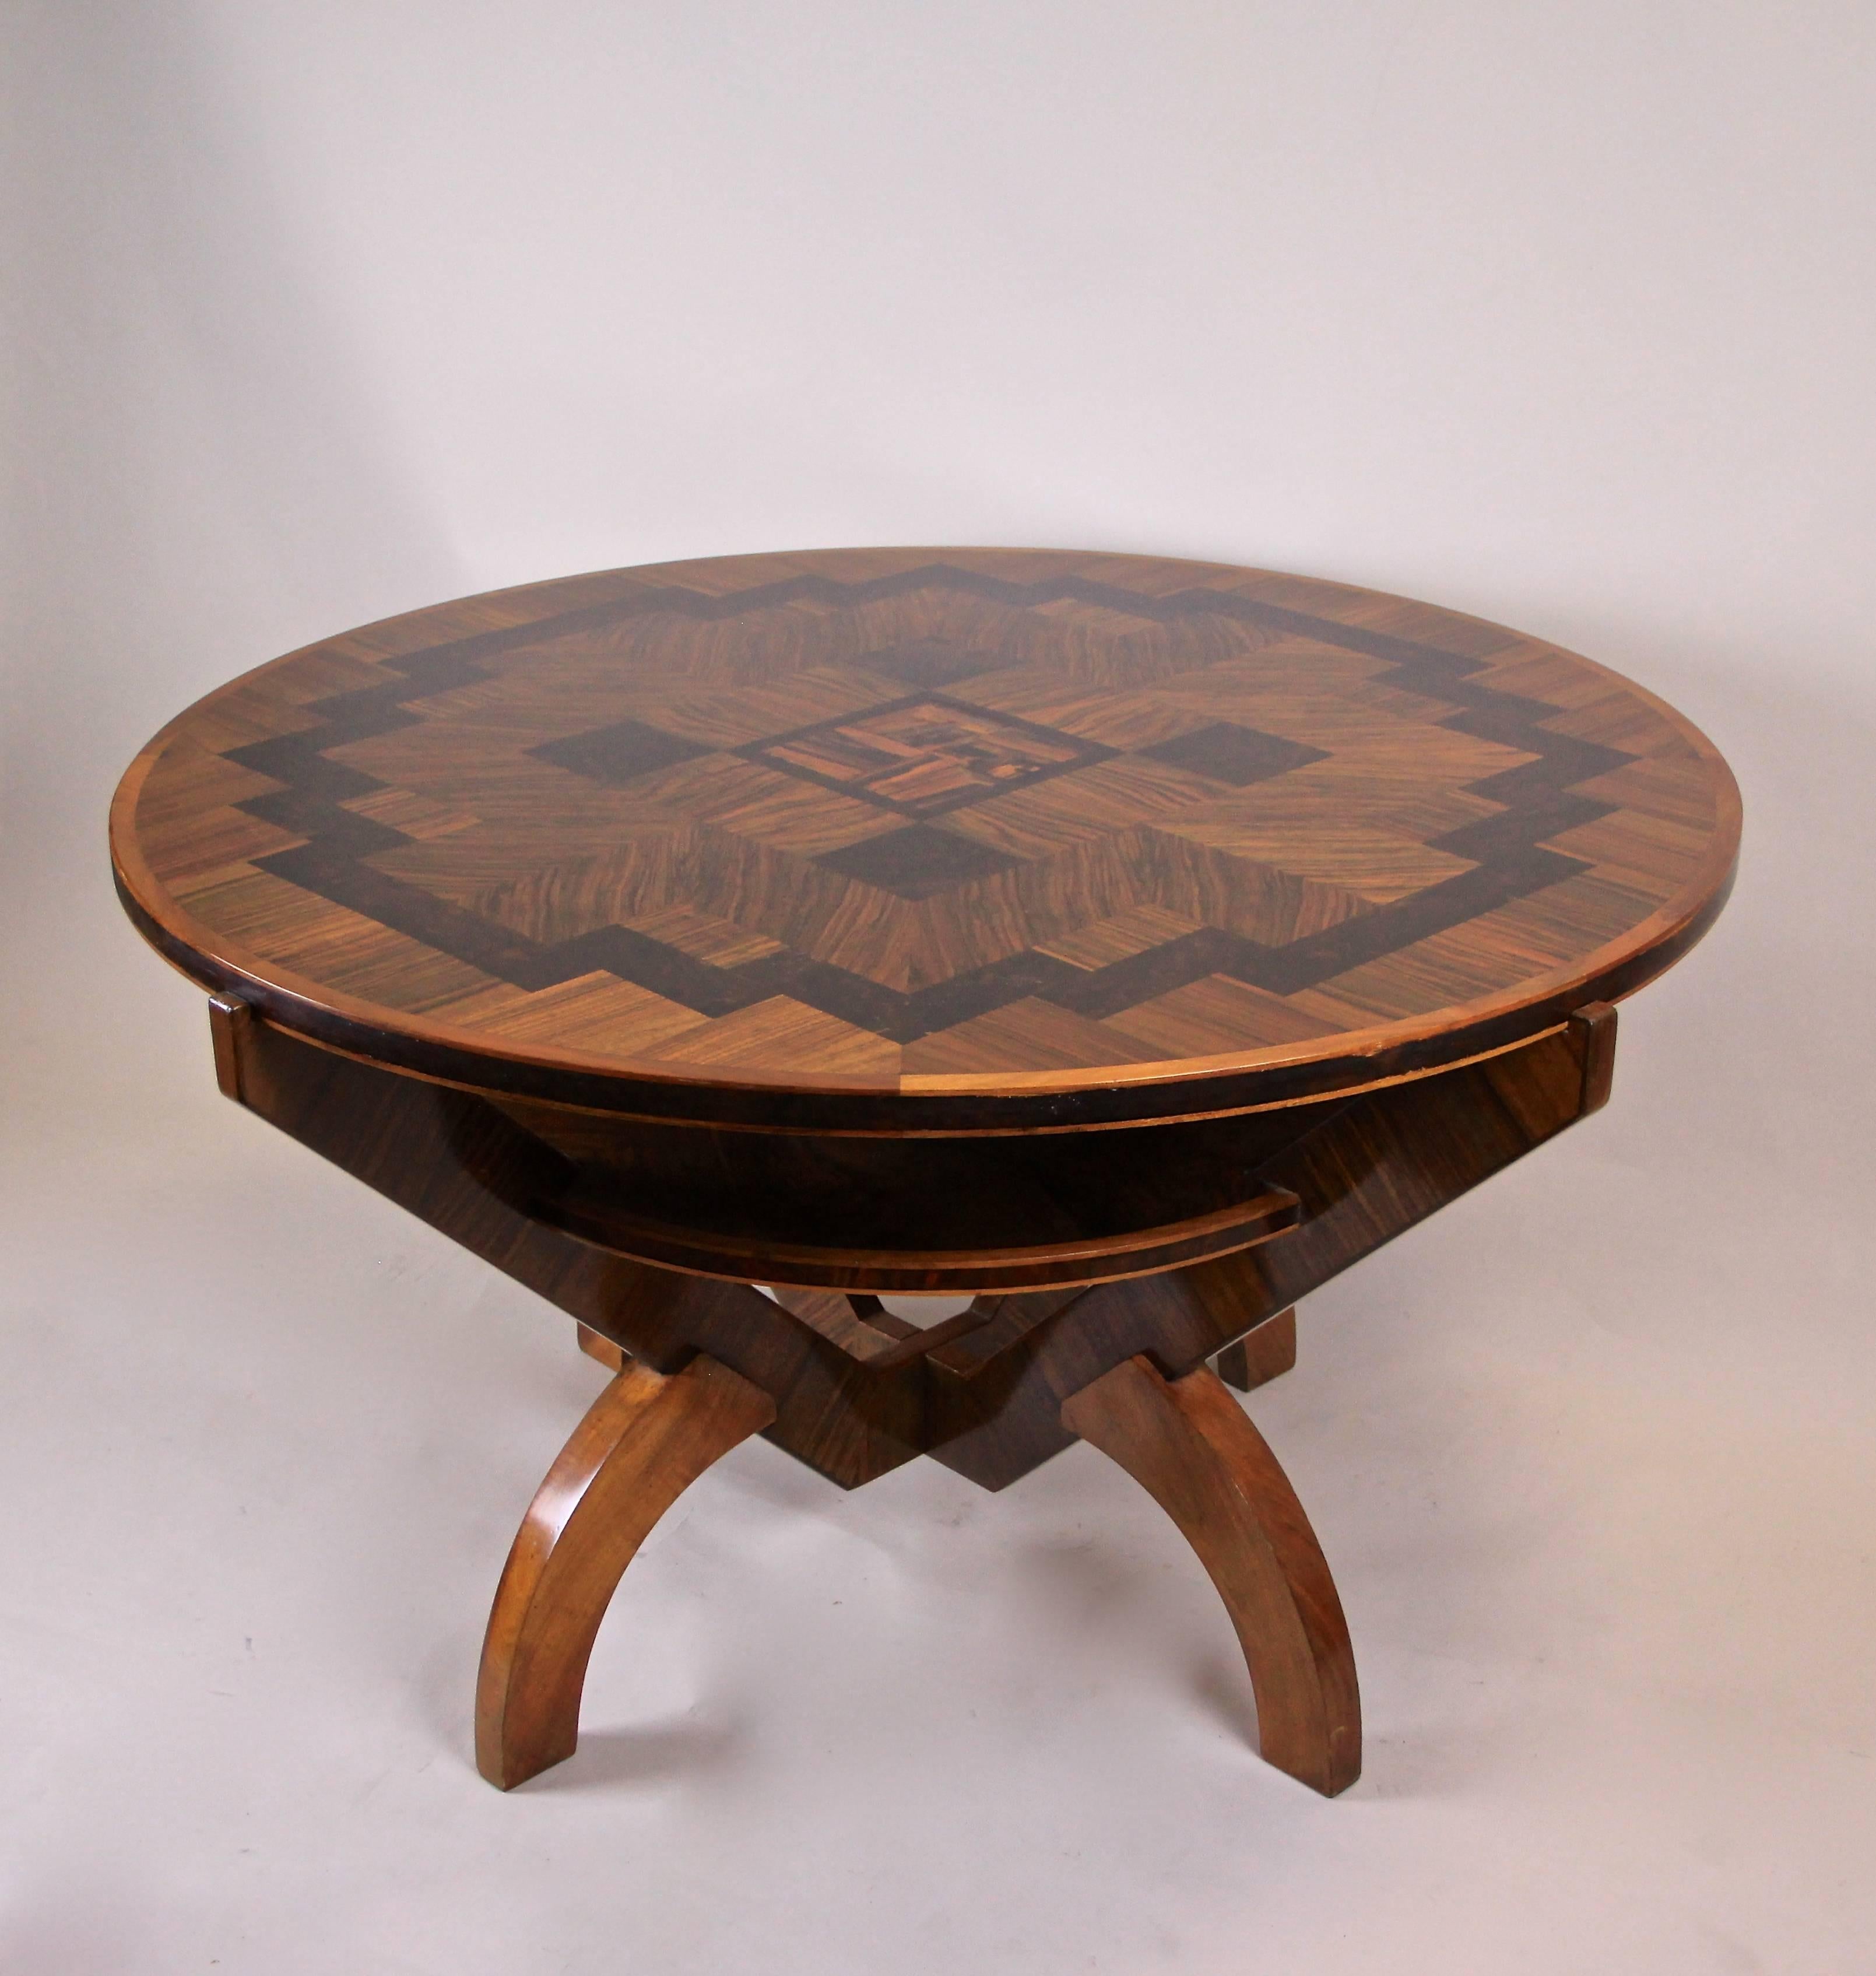 20th Century Art Deco Table with Marquetry Work by A. Herrgesell, Austria, circa 1925